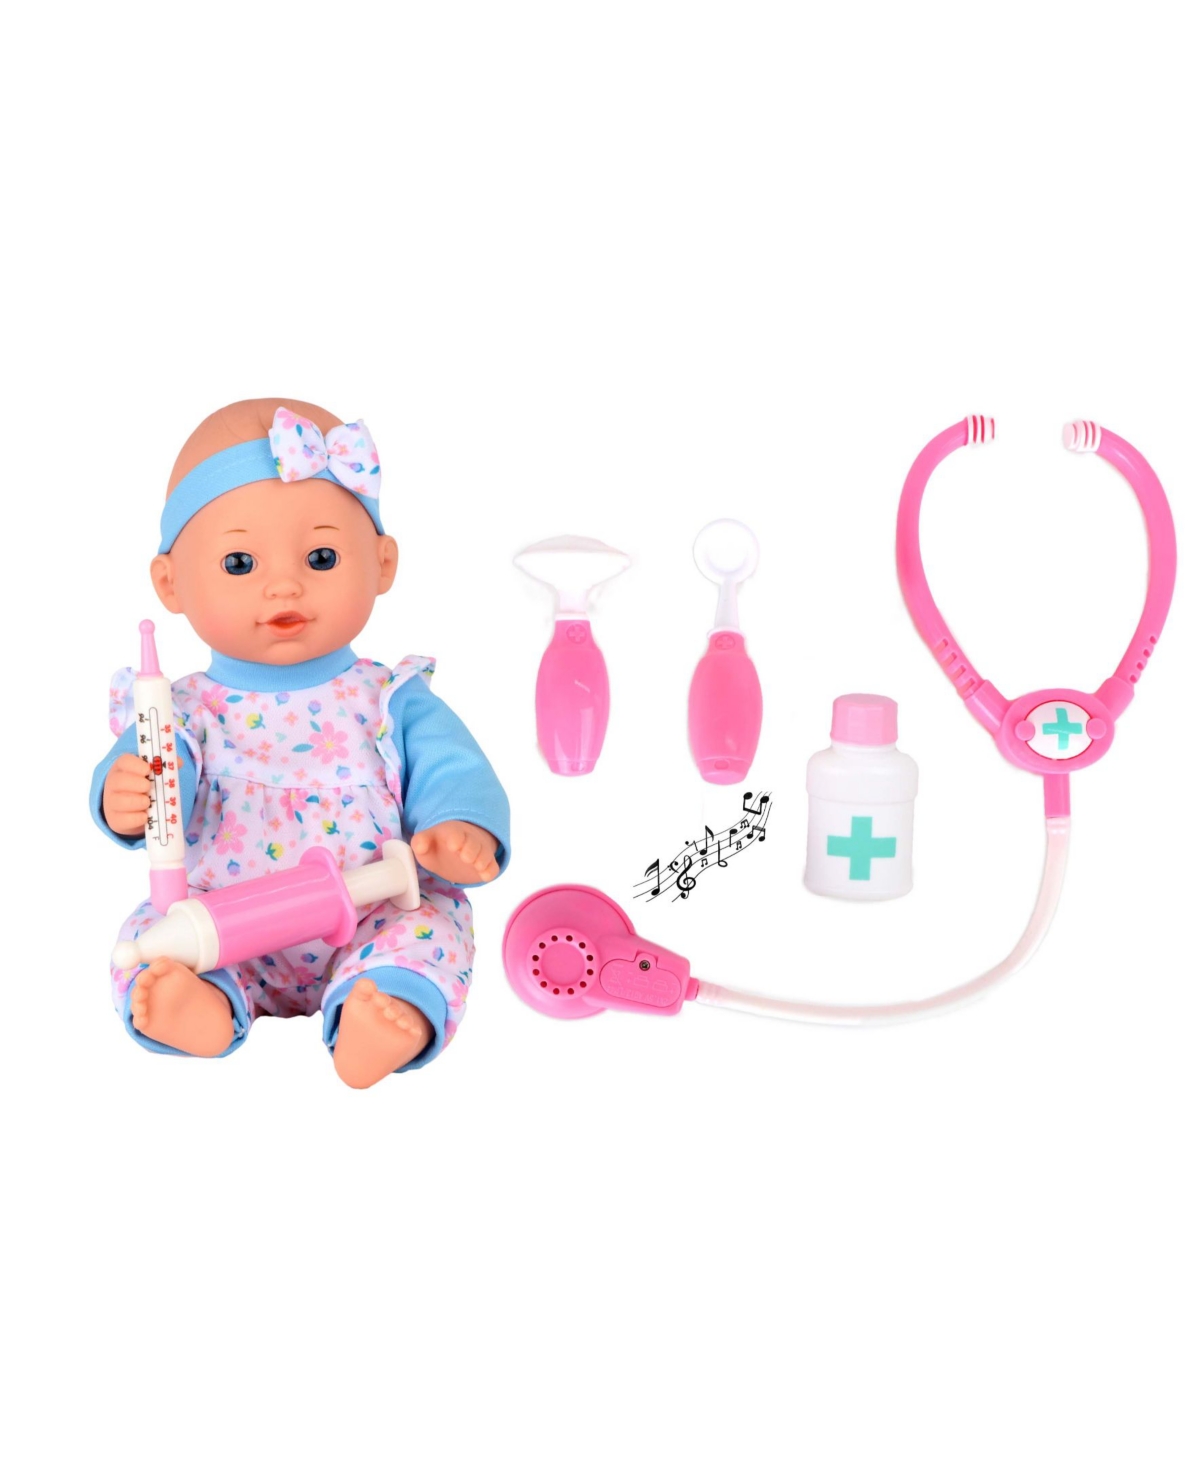 Ozbozz Dream Collection Toy Baby Doll With Medical Set In Gift Box, 12" In Multi